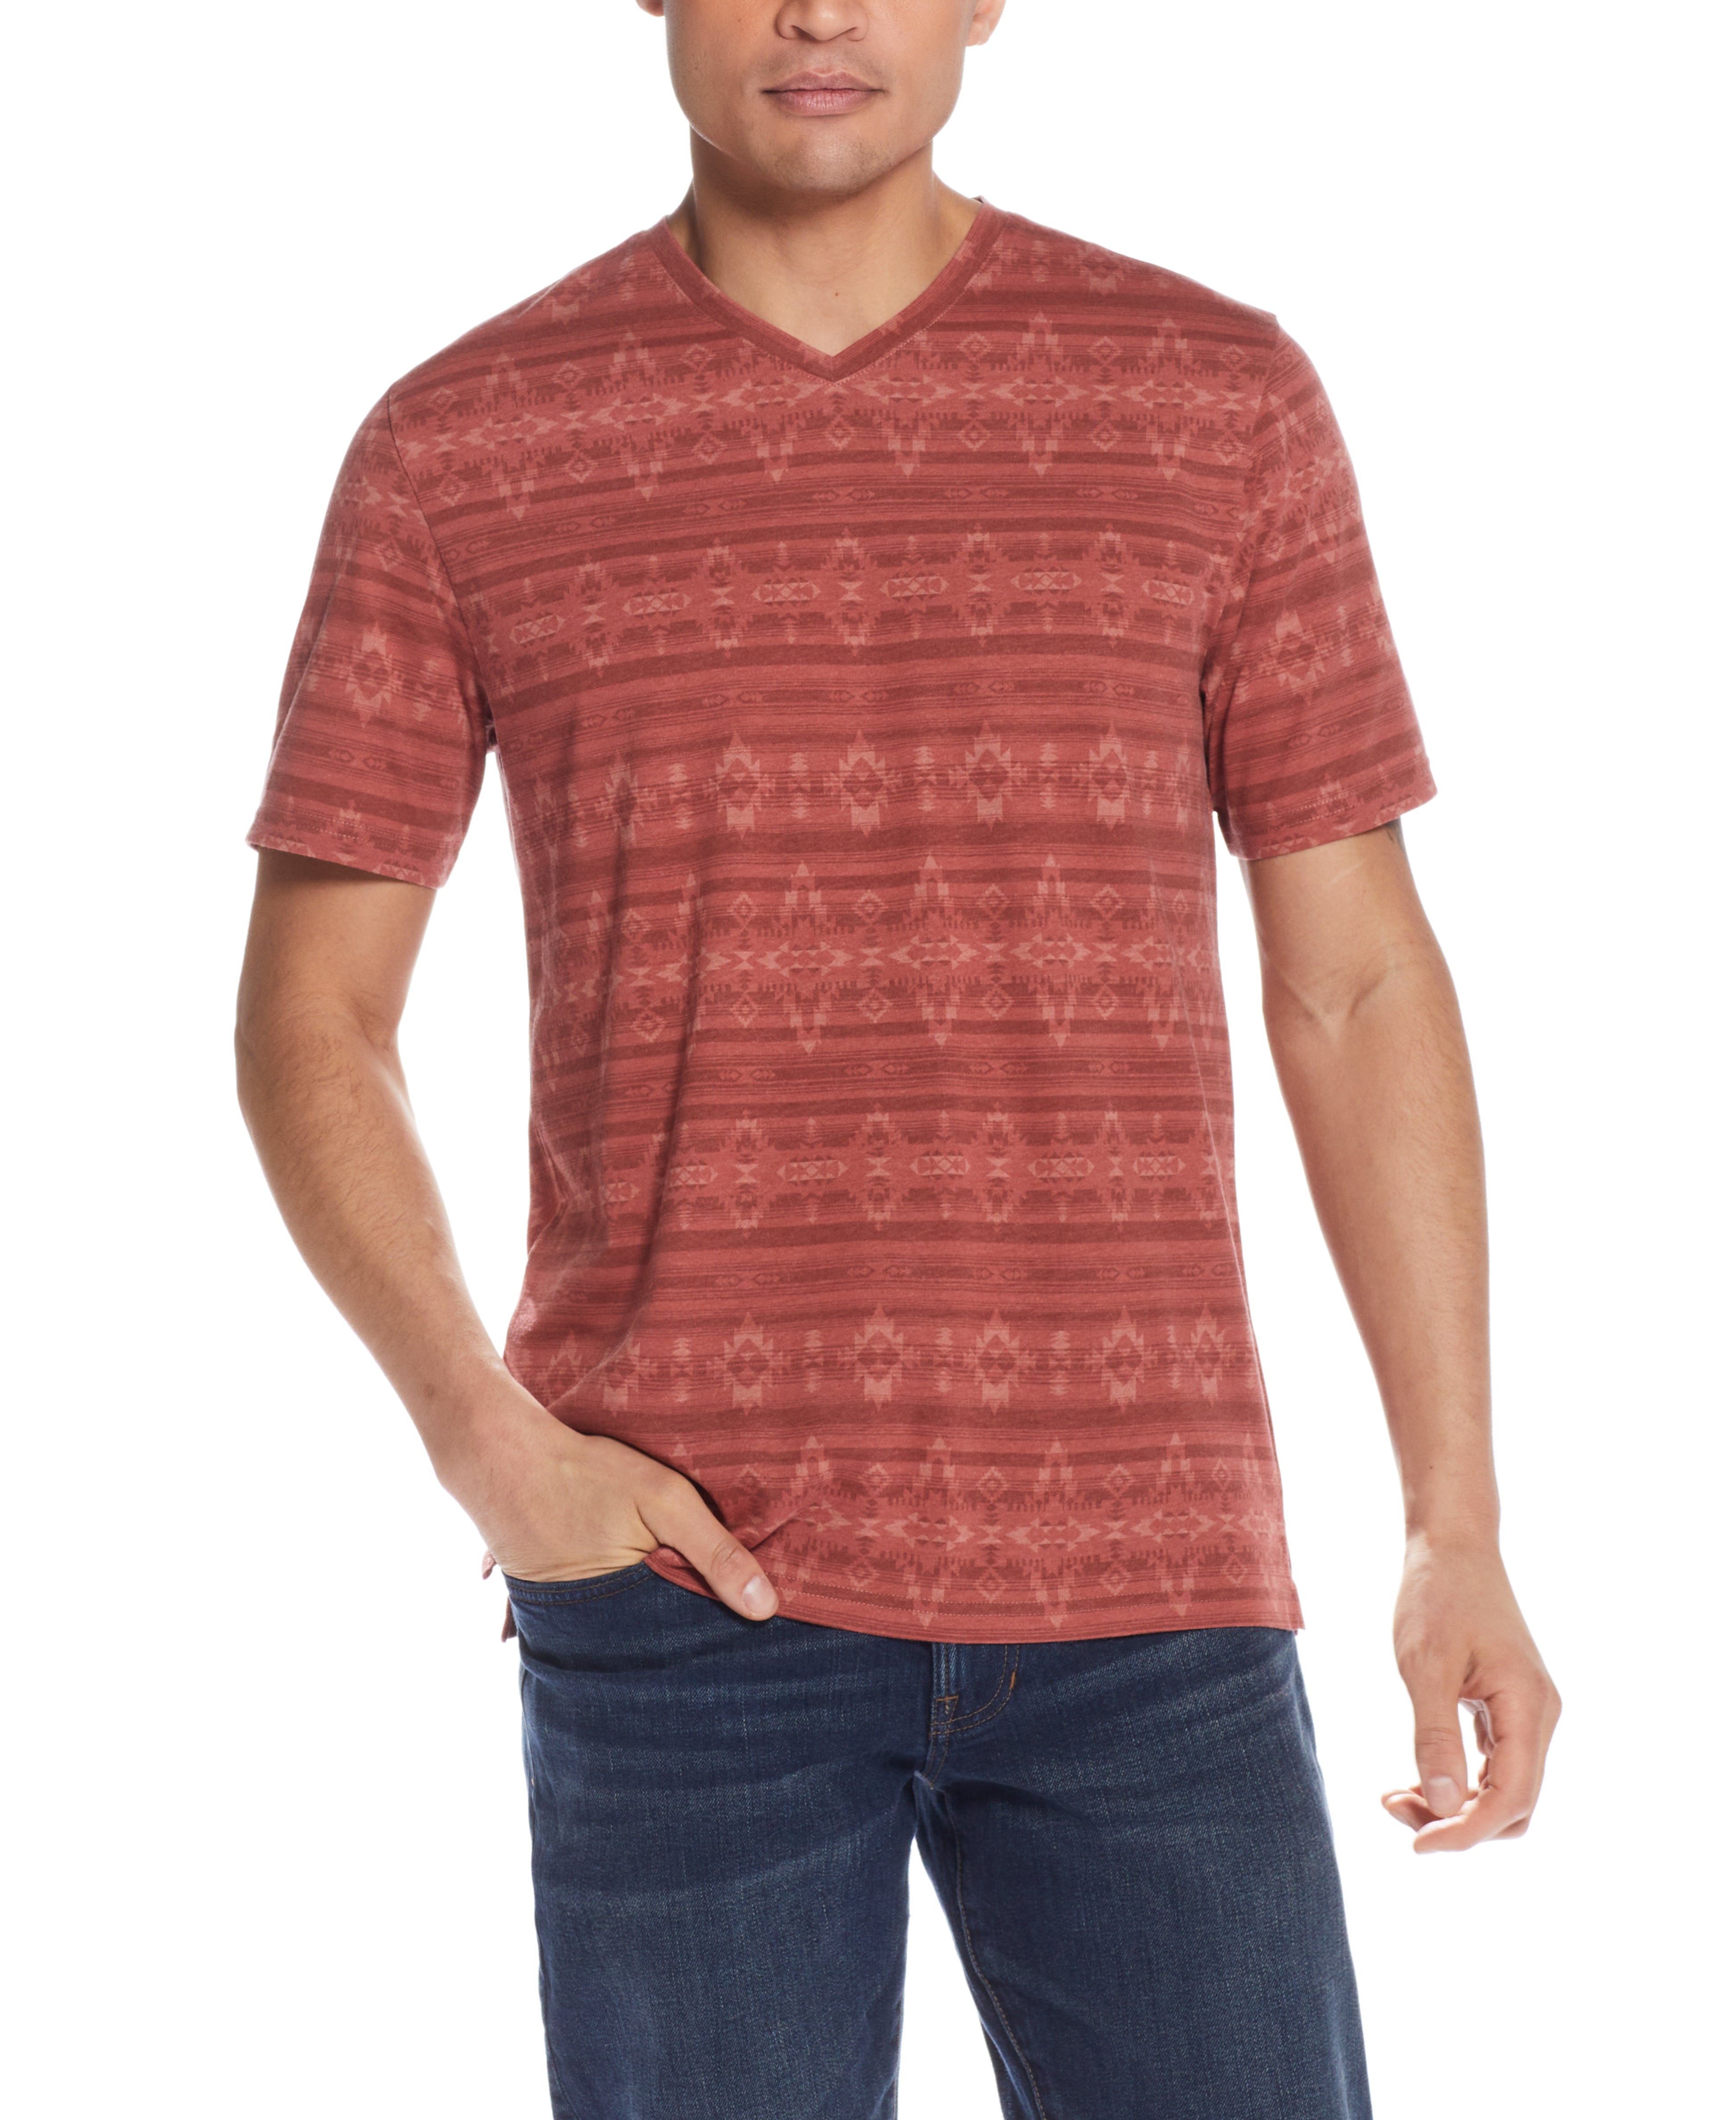 South West V Neck TEE IN Red Ochre